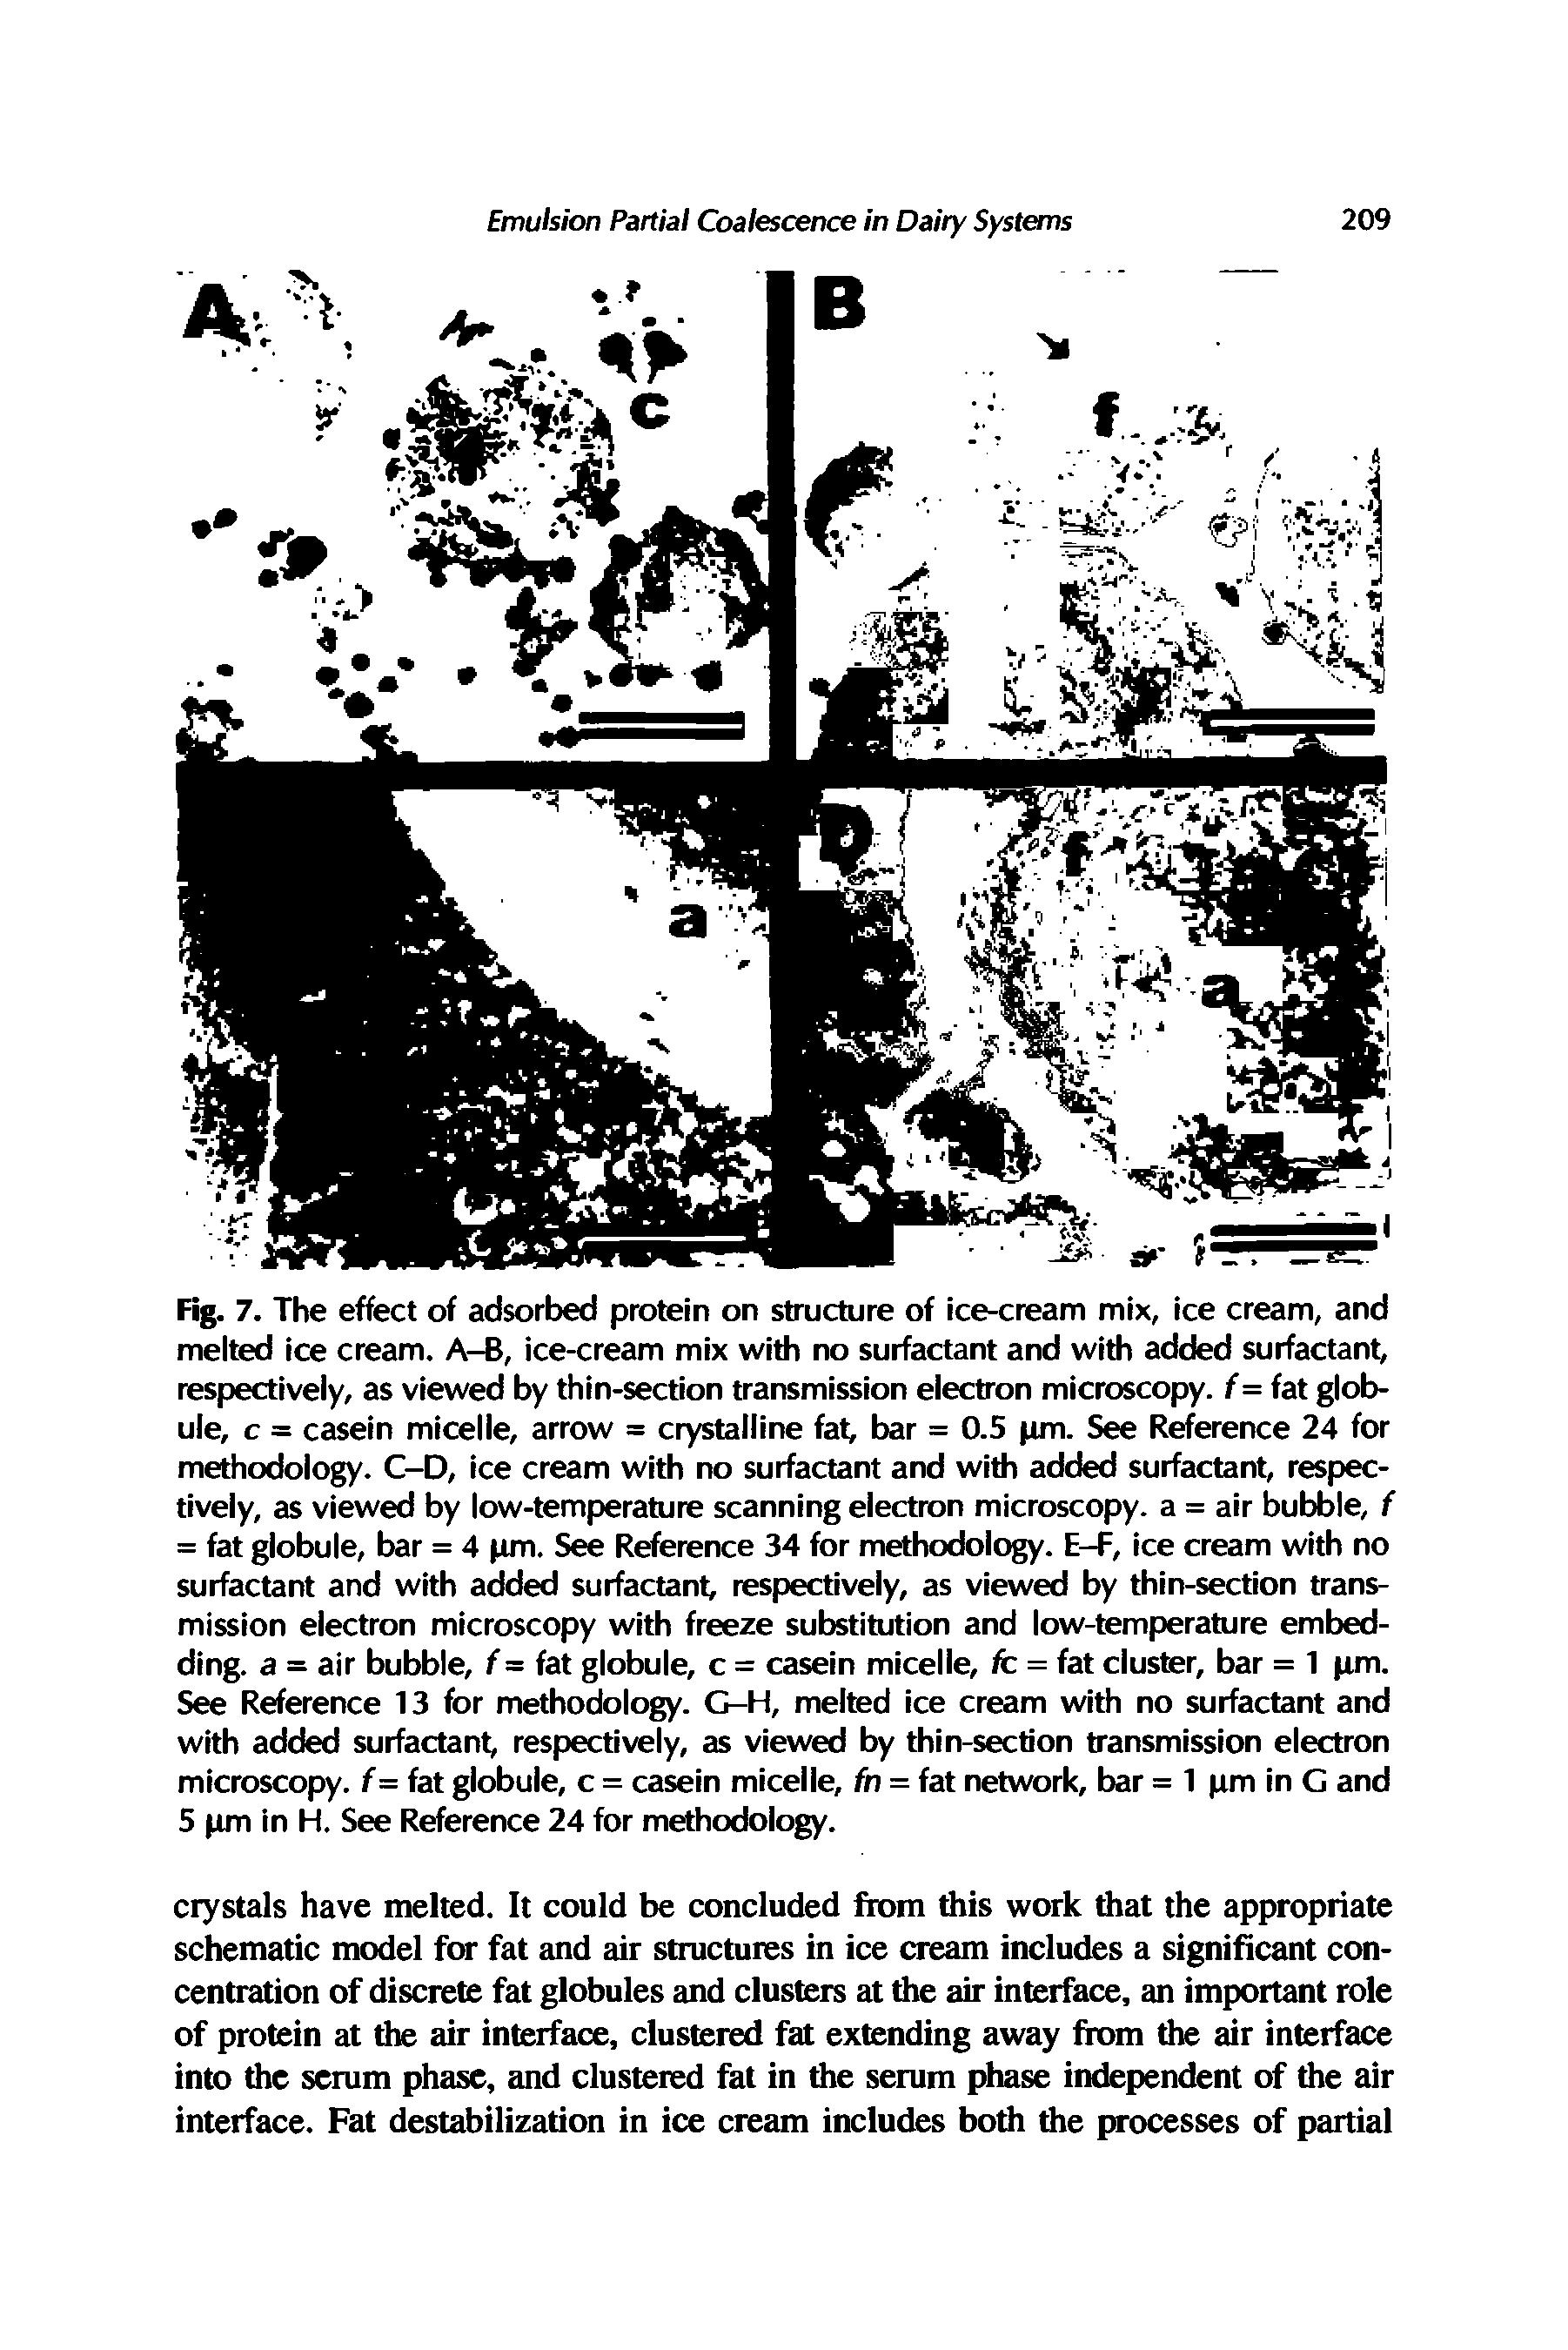 Fig. 7. The effect of adsorbed protein on structure of ice-cream mix, ice cream, and melted ice cream. A-B, ice-cream mix with no surfactant and with added surfactant, respectively, as viewed by thin-section transmission electron microscopy. f= fat globule, c = casein micelle, arrow = crystalline fat, bar = 0.5 pm. See Reference 24 for methodology. C-D, ice cream with no surfactant and with added surfactant, respectively, as viewed by low-temperature scanning electron microscopy, a = air bubble, f = fat globule, bar = 4 pm. See Reference 34 for methodology. E-F, ice cream with no surfactant and with added surfactant respectively, as viewed by thin-section transmission electron microscopy with freeze substitution and low-temperature embedding. a = air bubble, f= fat globule, c = casein micelle, fc = fat cluster, bar = 1 pm. See Reference 13 for methodology. G-H, melted ice cream with no surfactant and with added surfactant respectively, as viewed by thin-section transmission electron microscopy. f= fat globule, c = casein micelle, fn = fat network, bar = 1 pm in G and 5 pm in H. See Reference 24 for methodology.